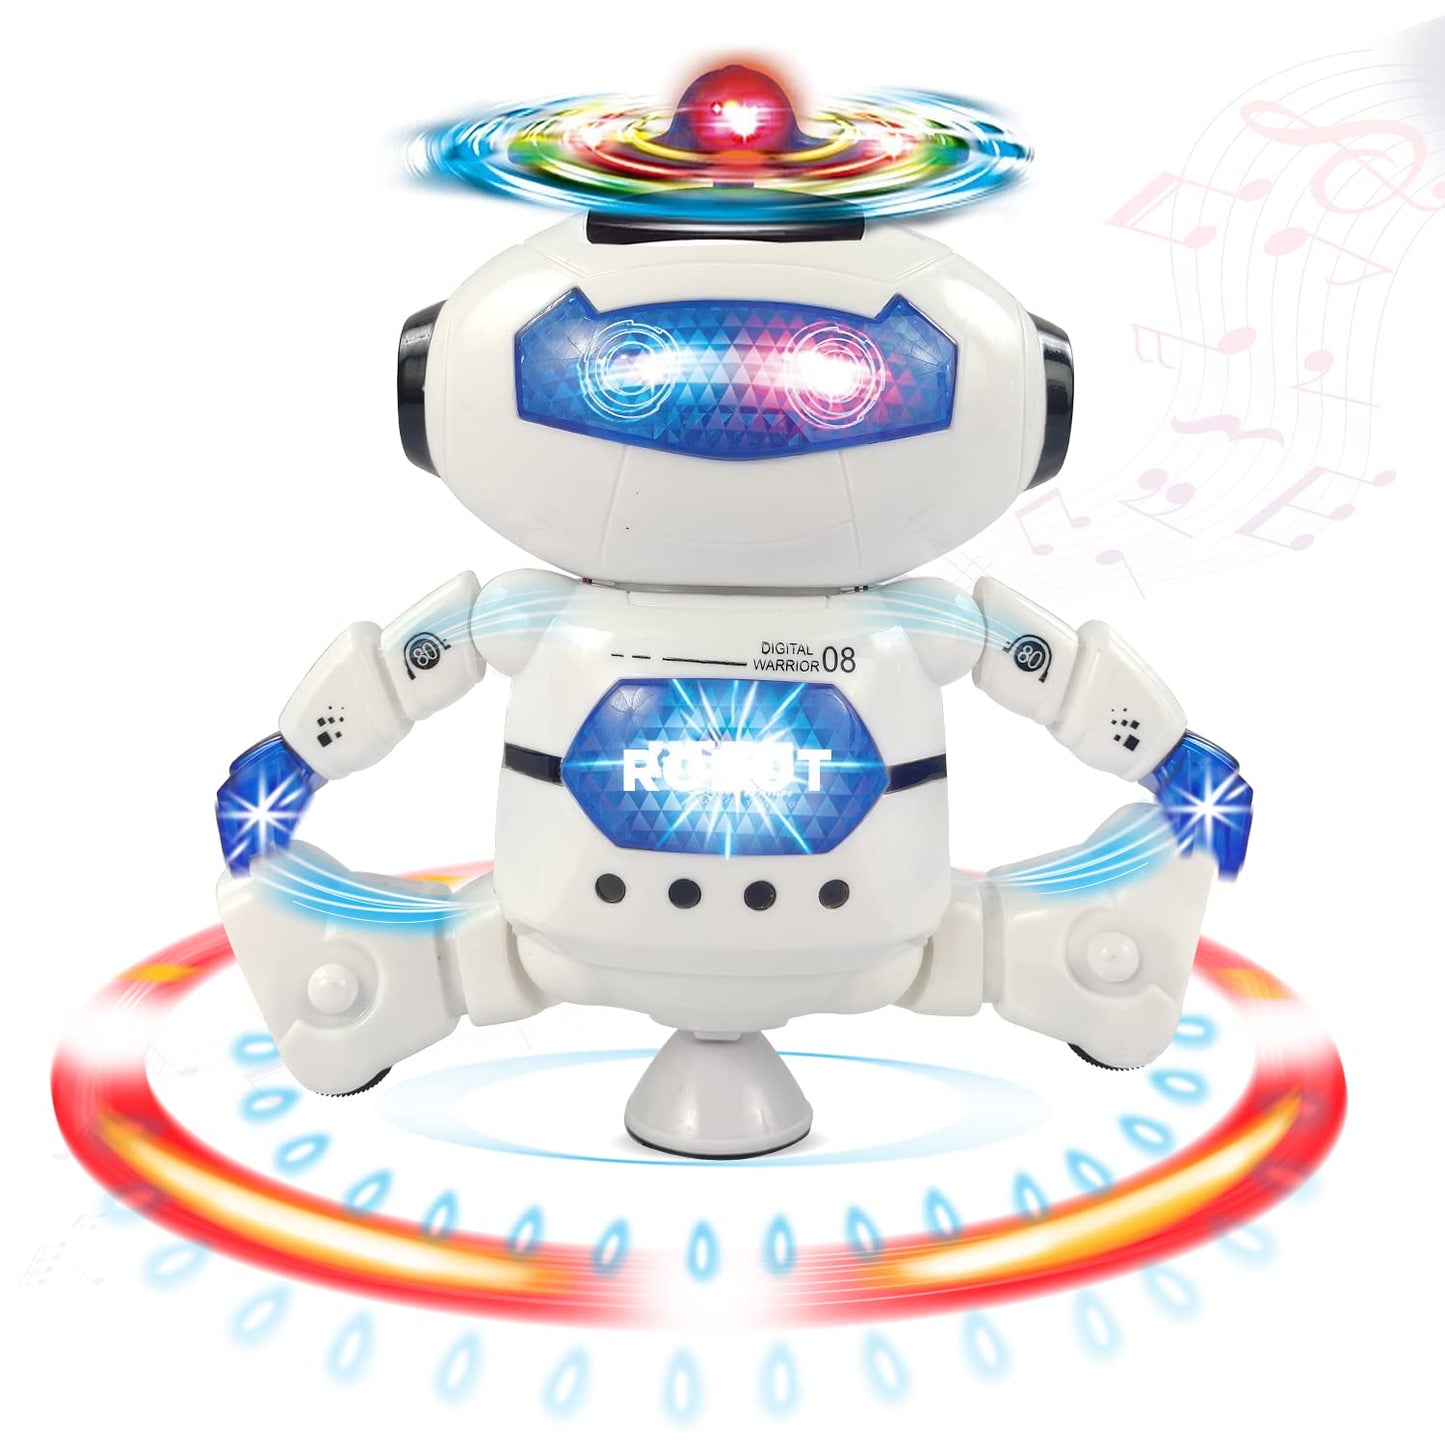 MM TOYS Dancing Naughty Robot Toy , Lights & Music, 2 AA Batteries, 2-4 Years - White